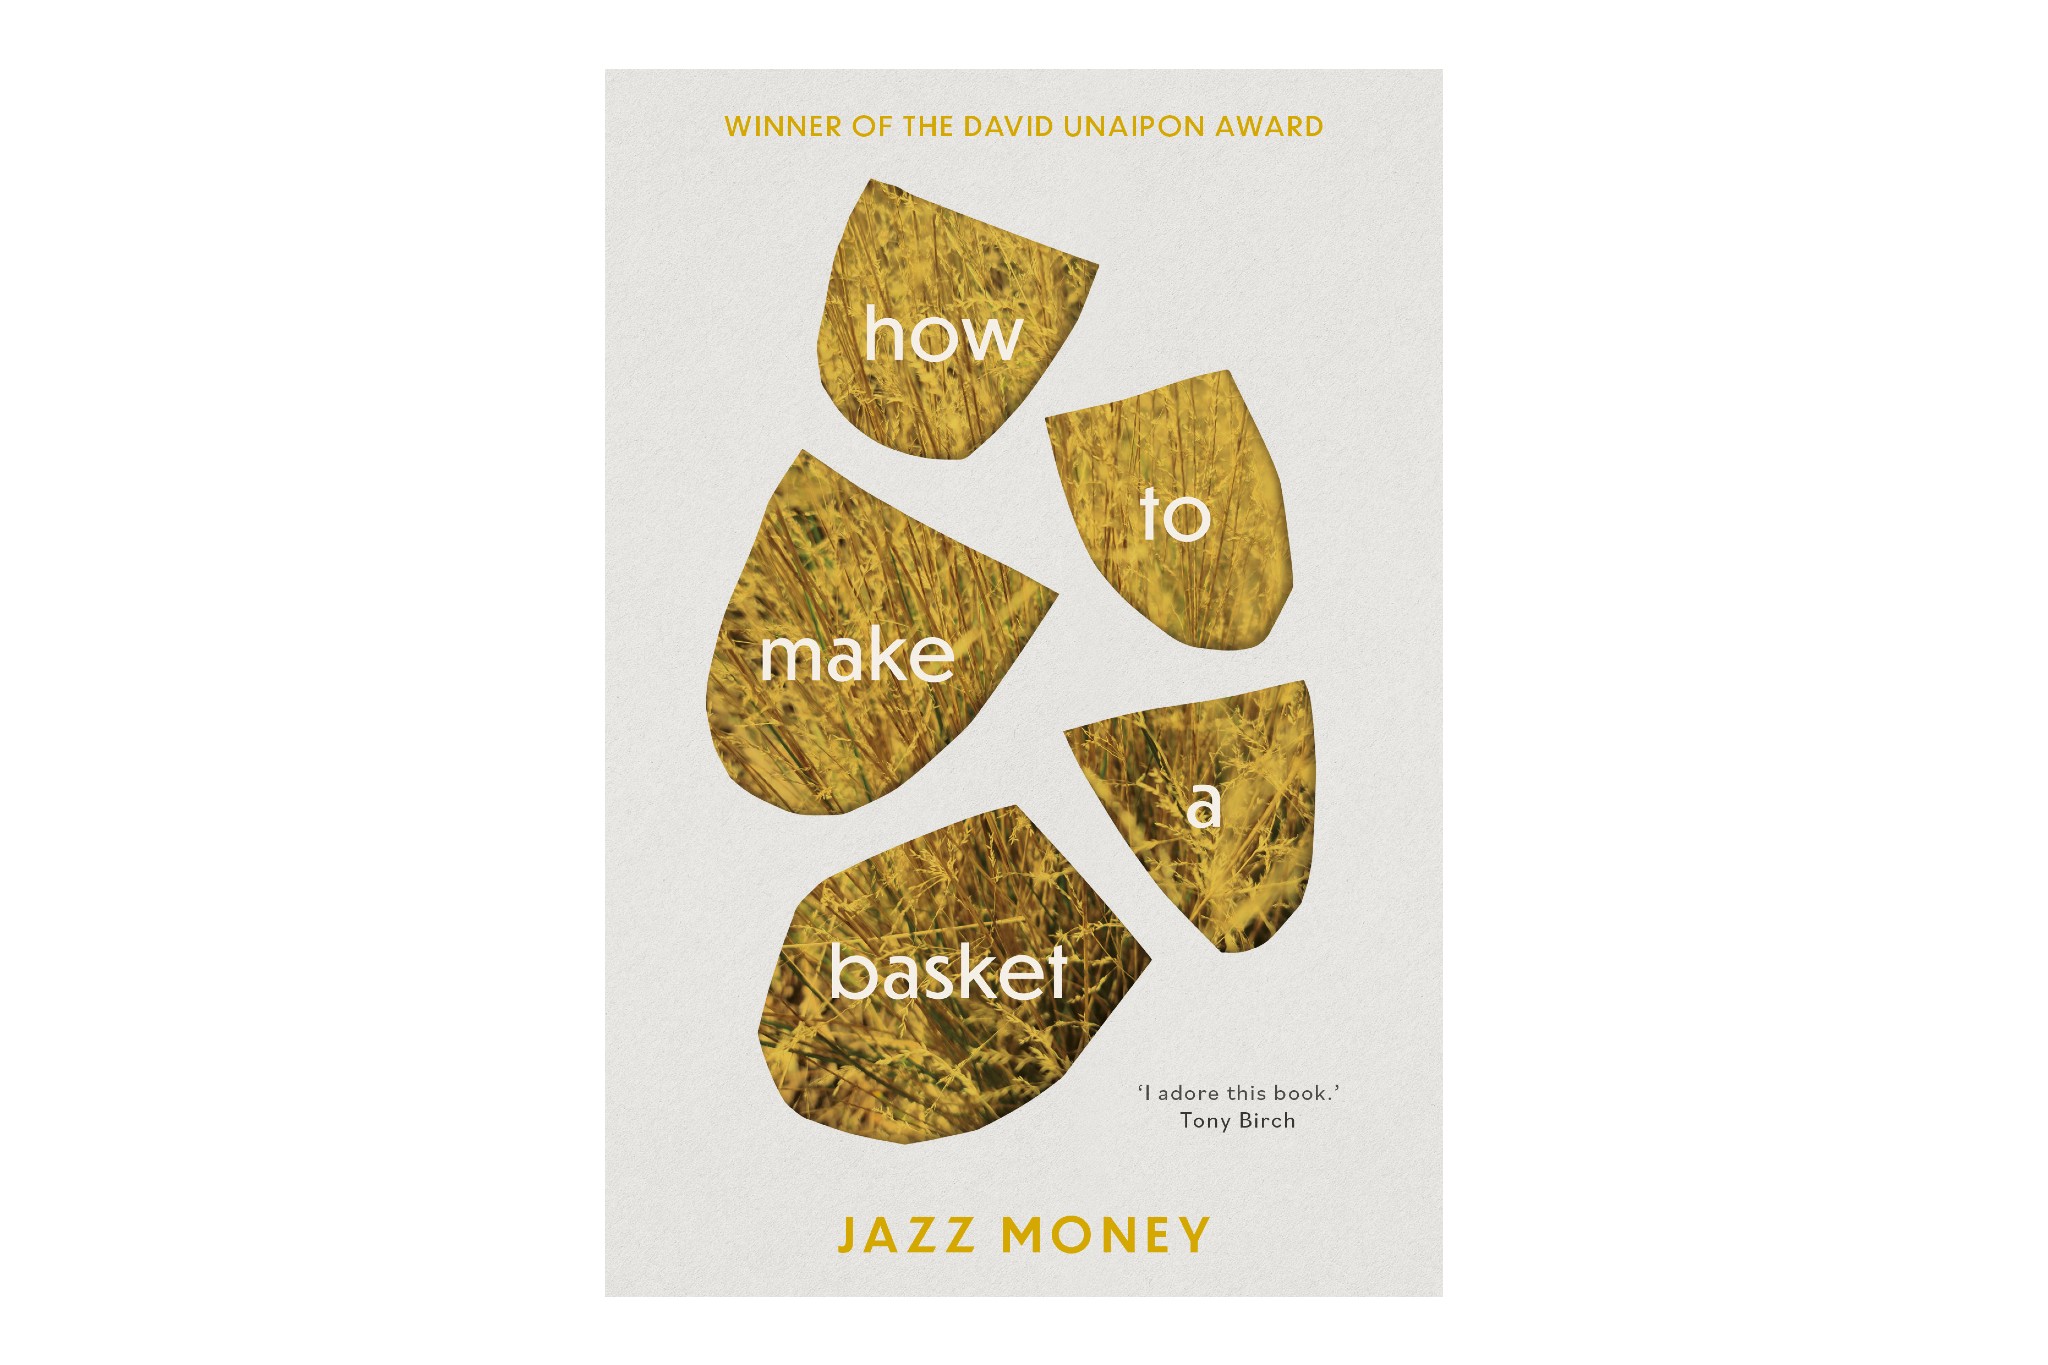 The cover of Jazz Money's poetry book, How to make a basket. The words '\hpw to make a basket' are in separate abstract shapes, patterned with long yellow grass. 